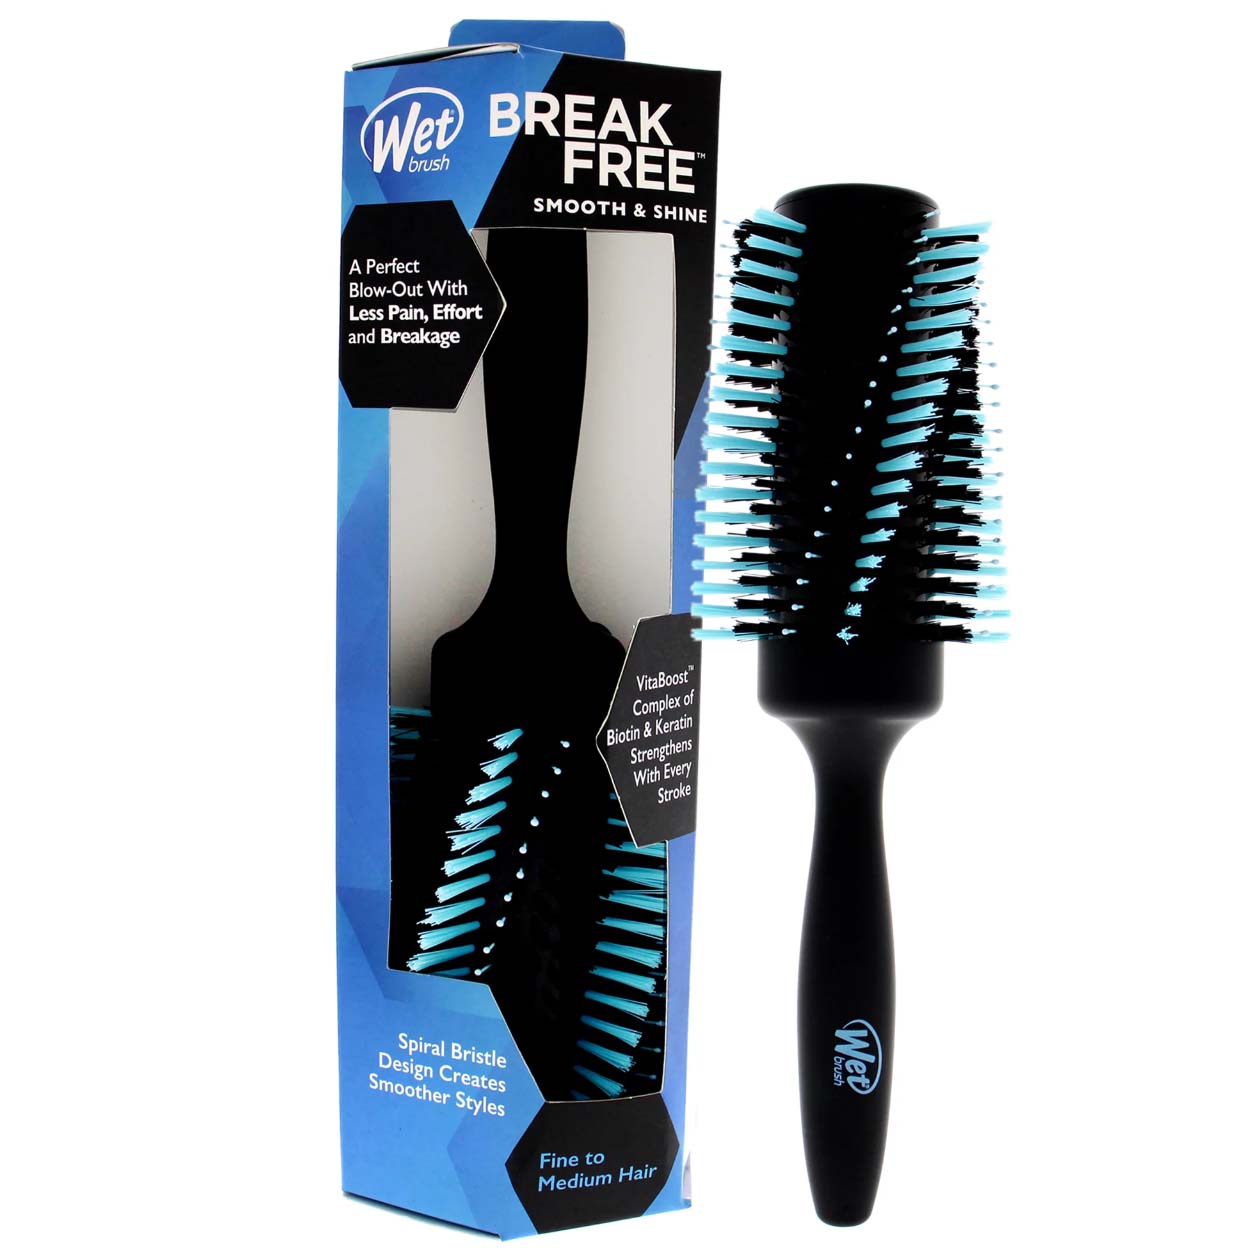 Blue and black round brush with box packaging